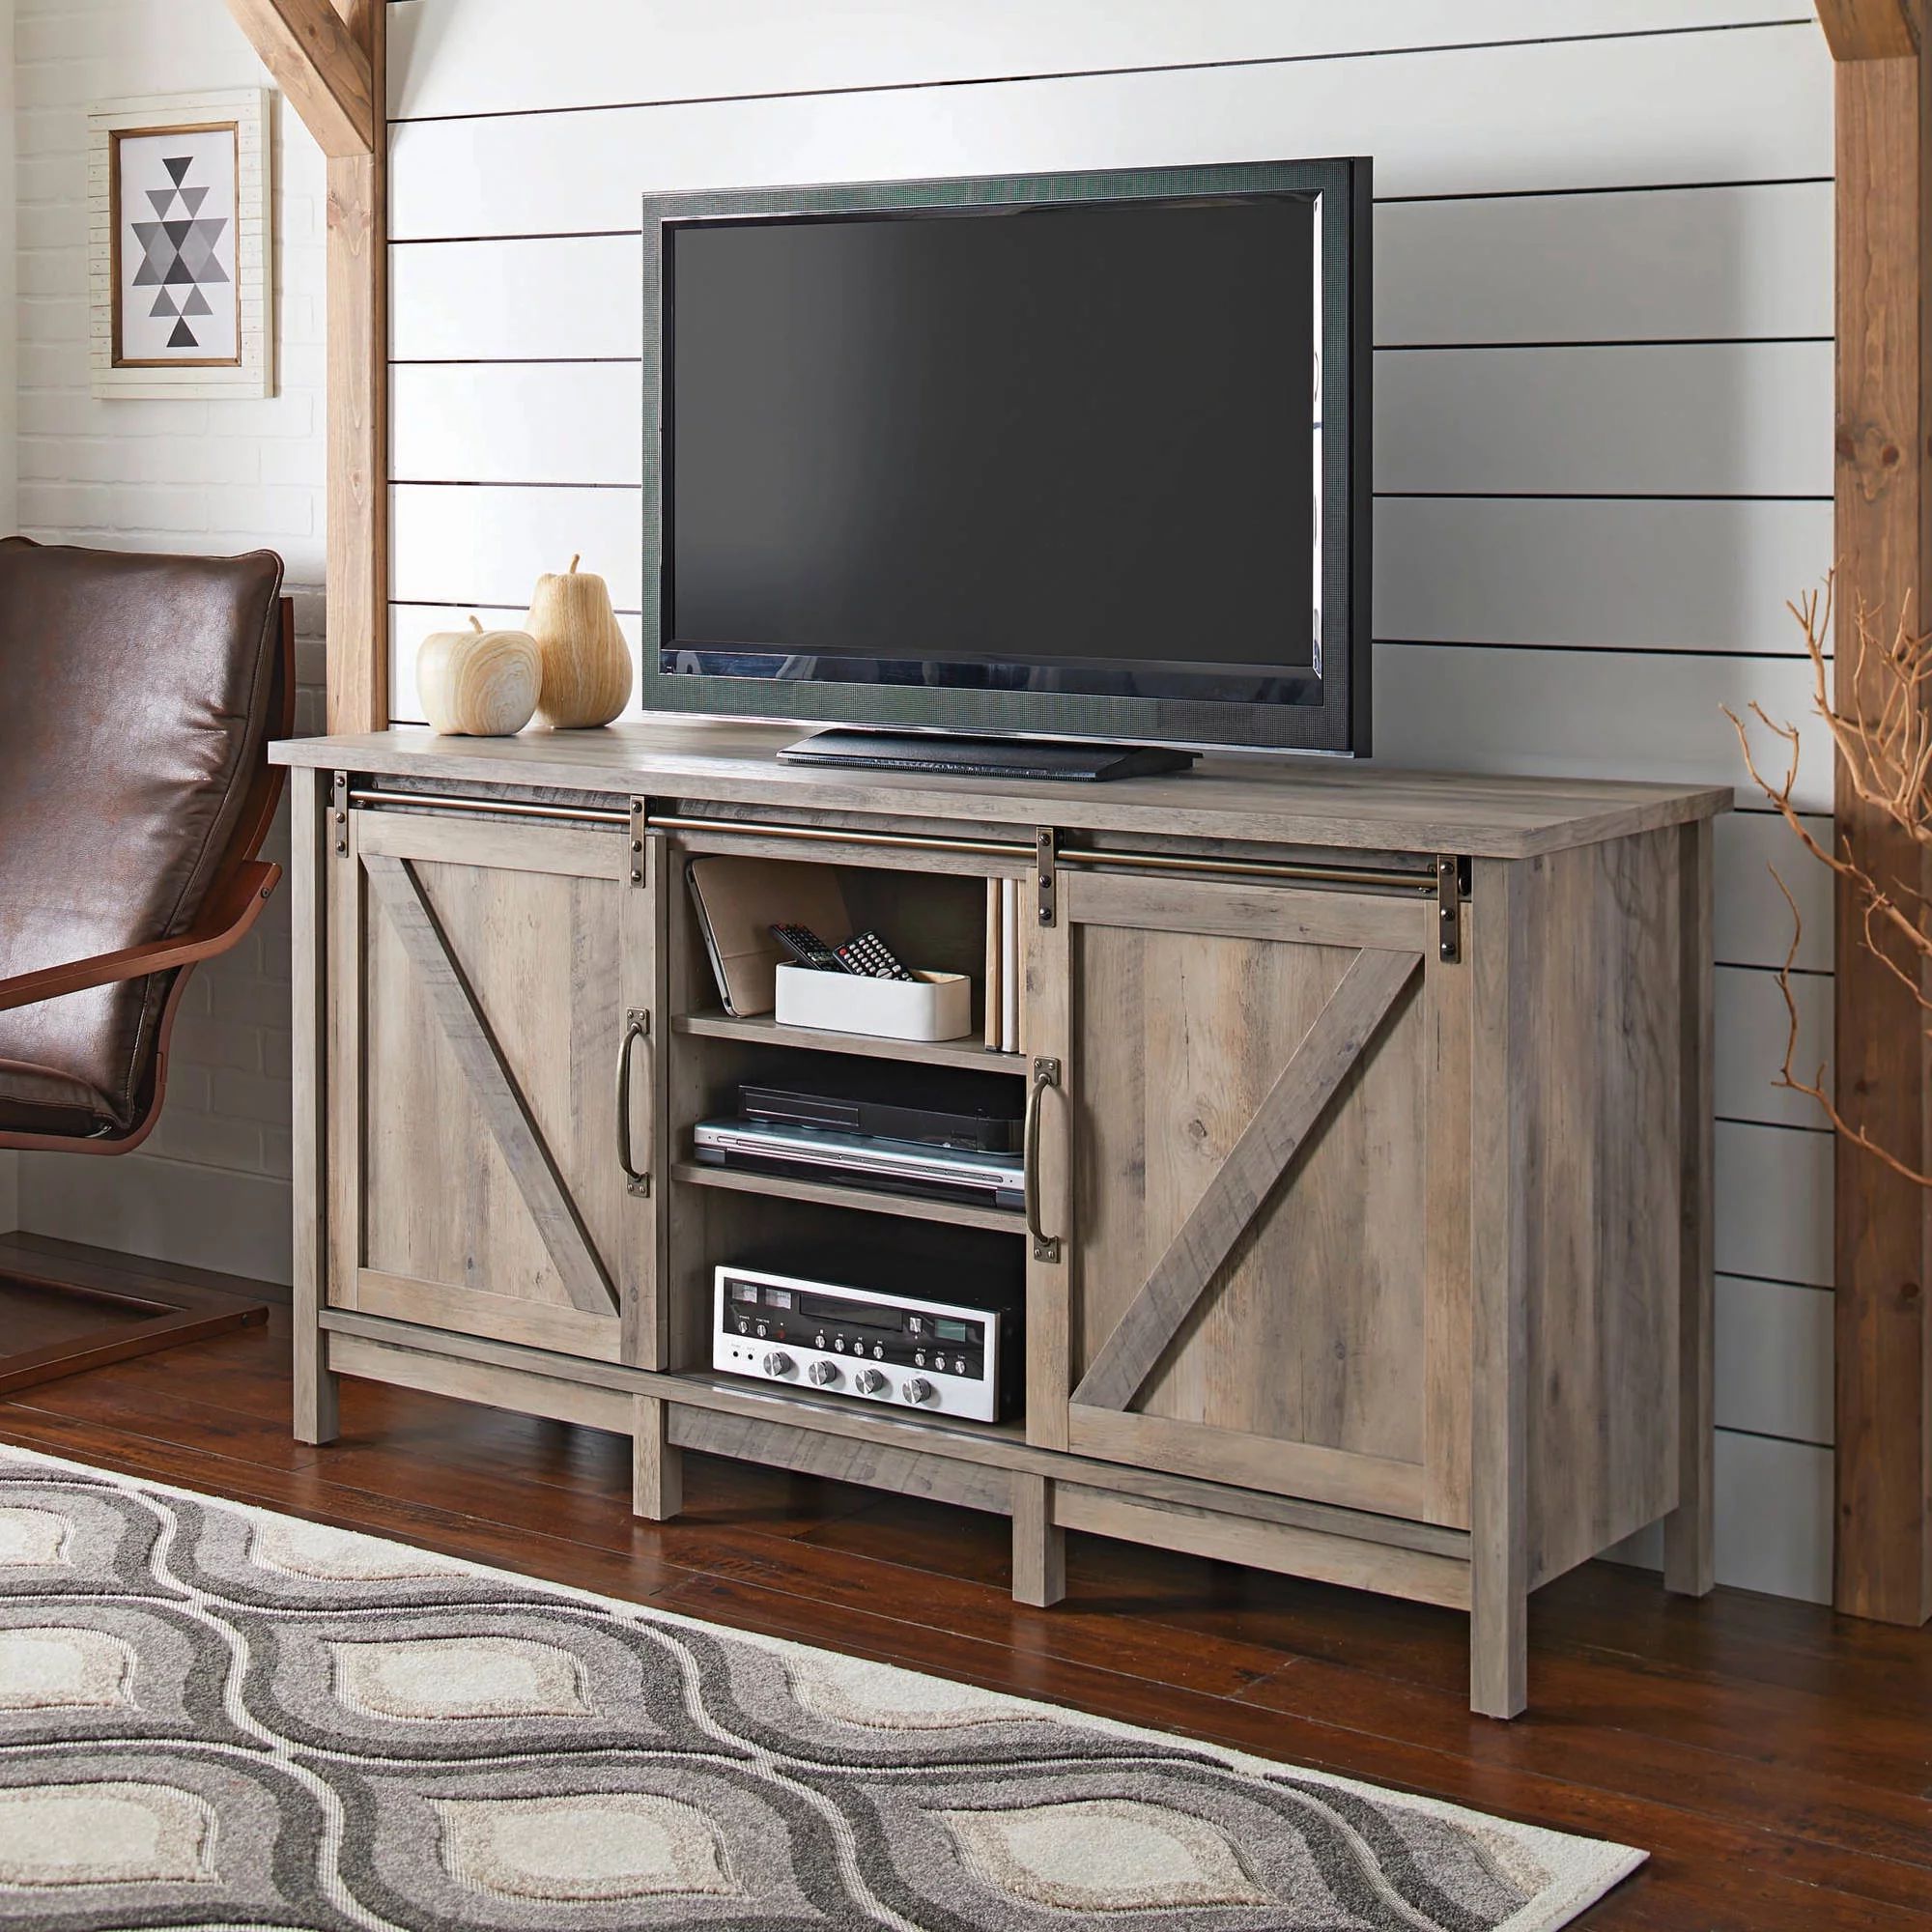 Better Homes & Gardens Modern Farmhouse TV Stand for TVs up to 70", Rustic Gray Finish | Walmart (US)